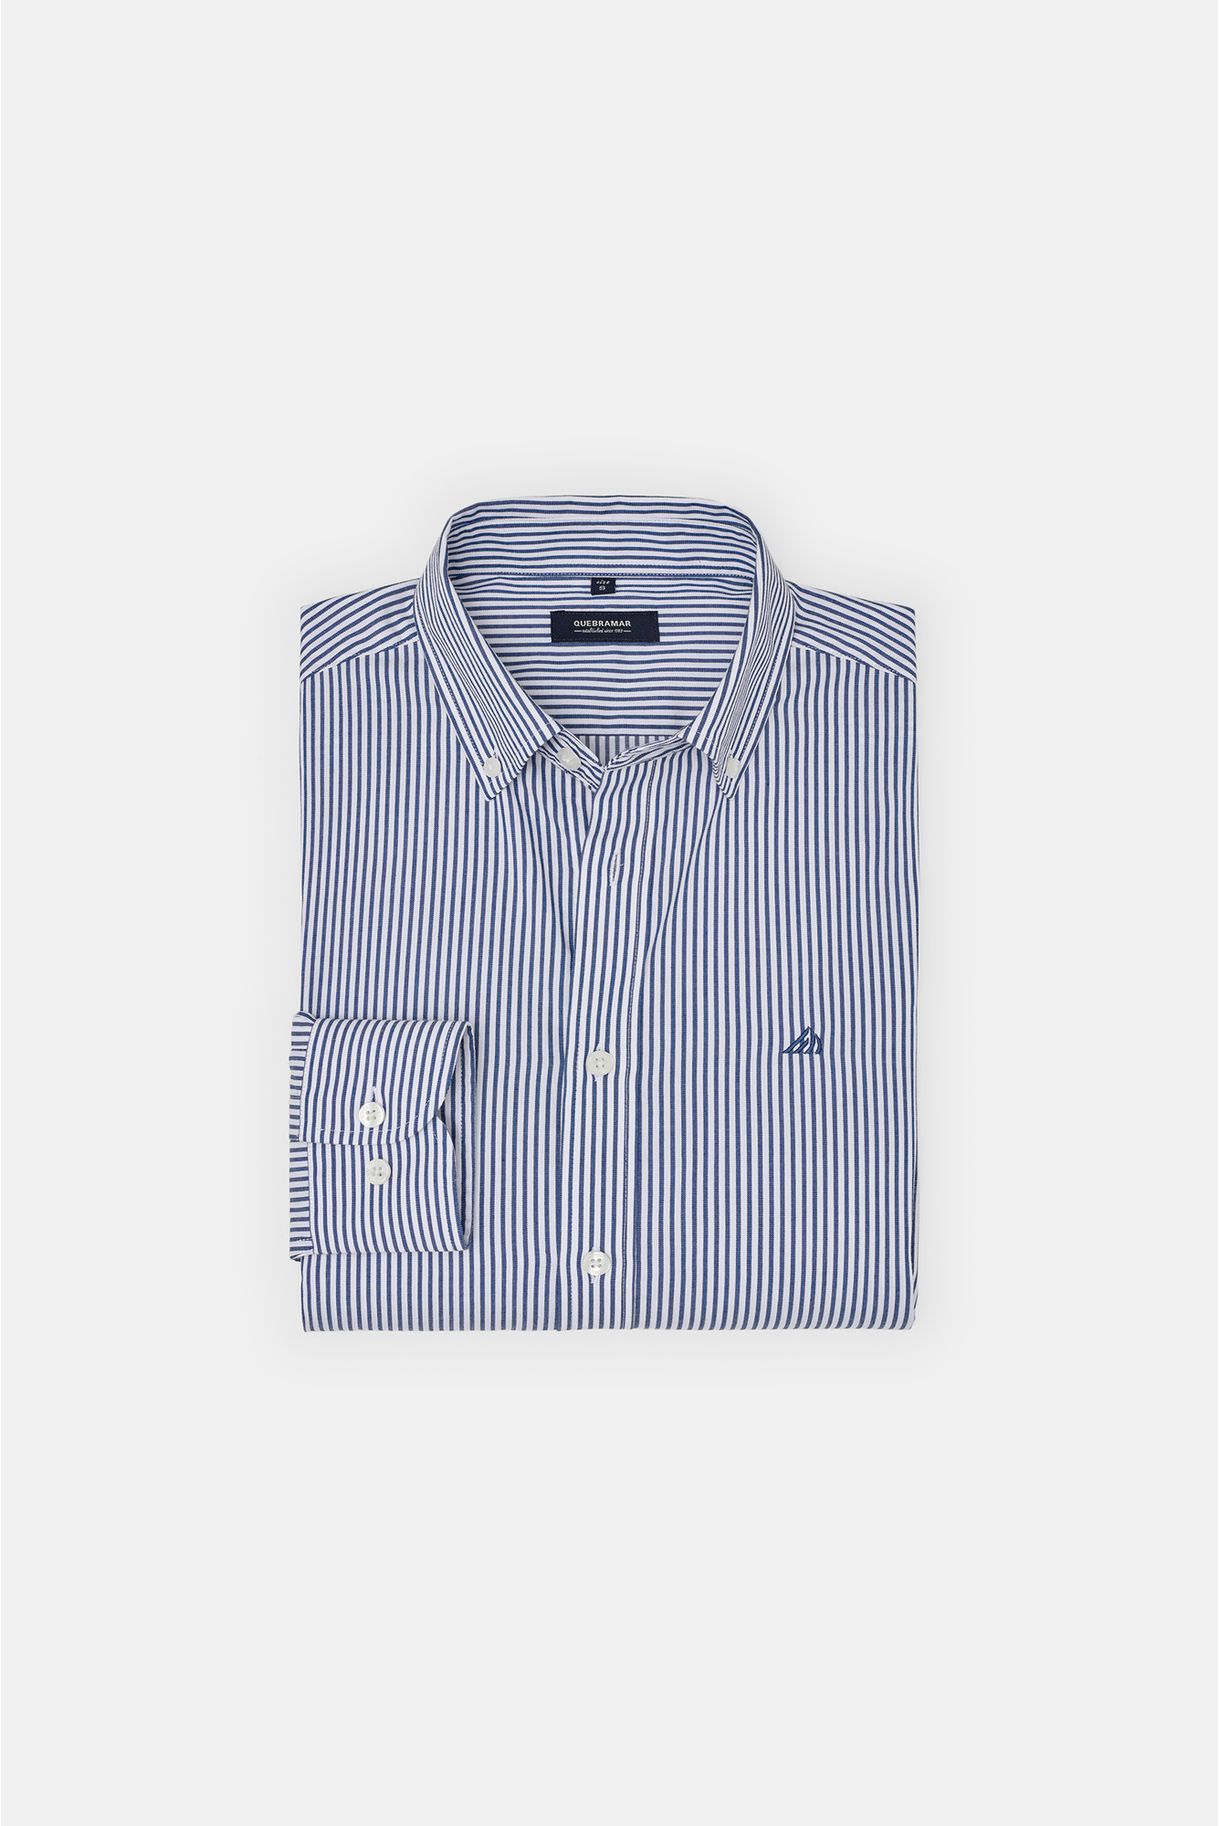 Men's shirt with stripes